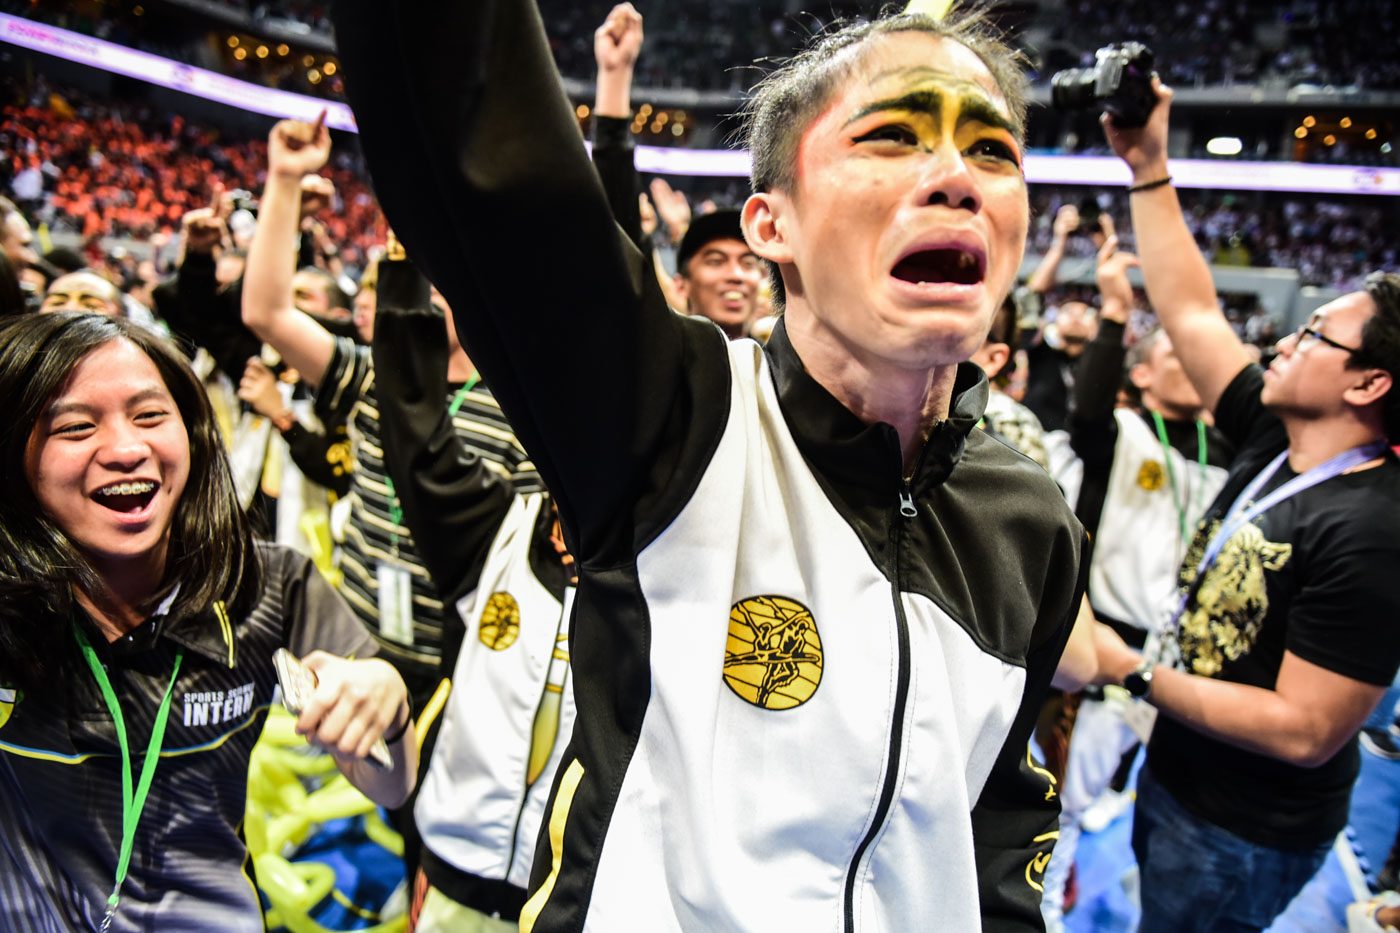 EMOTIONAL. UST finally makes it back to the podium after last year's medal drought. Photo by Alecs Ongcal/Rappler 